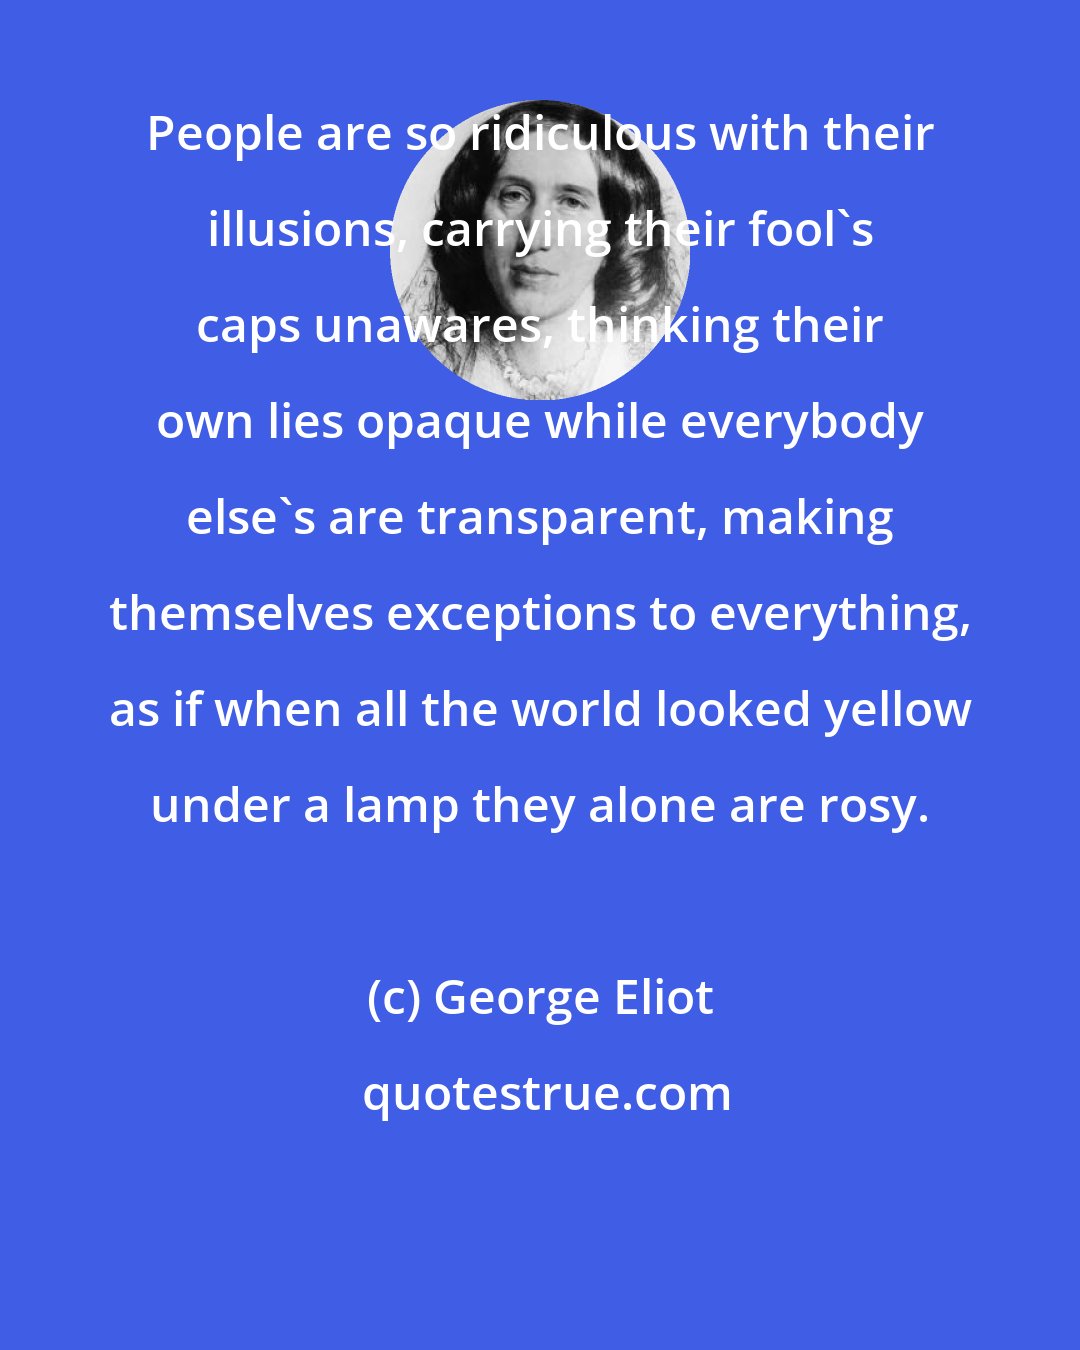 George Eliot: People are so ridiculous with their illusions, carrying their fool's caps unawares, thinking their own lies opaque while everybody else's are transparent, making themselves exceptions to everything, as if when all the world looked yellow under a lamp they alone are rosy.